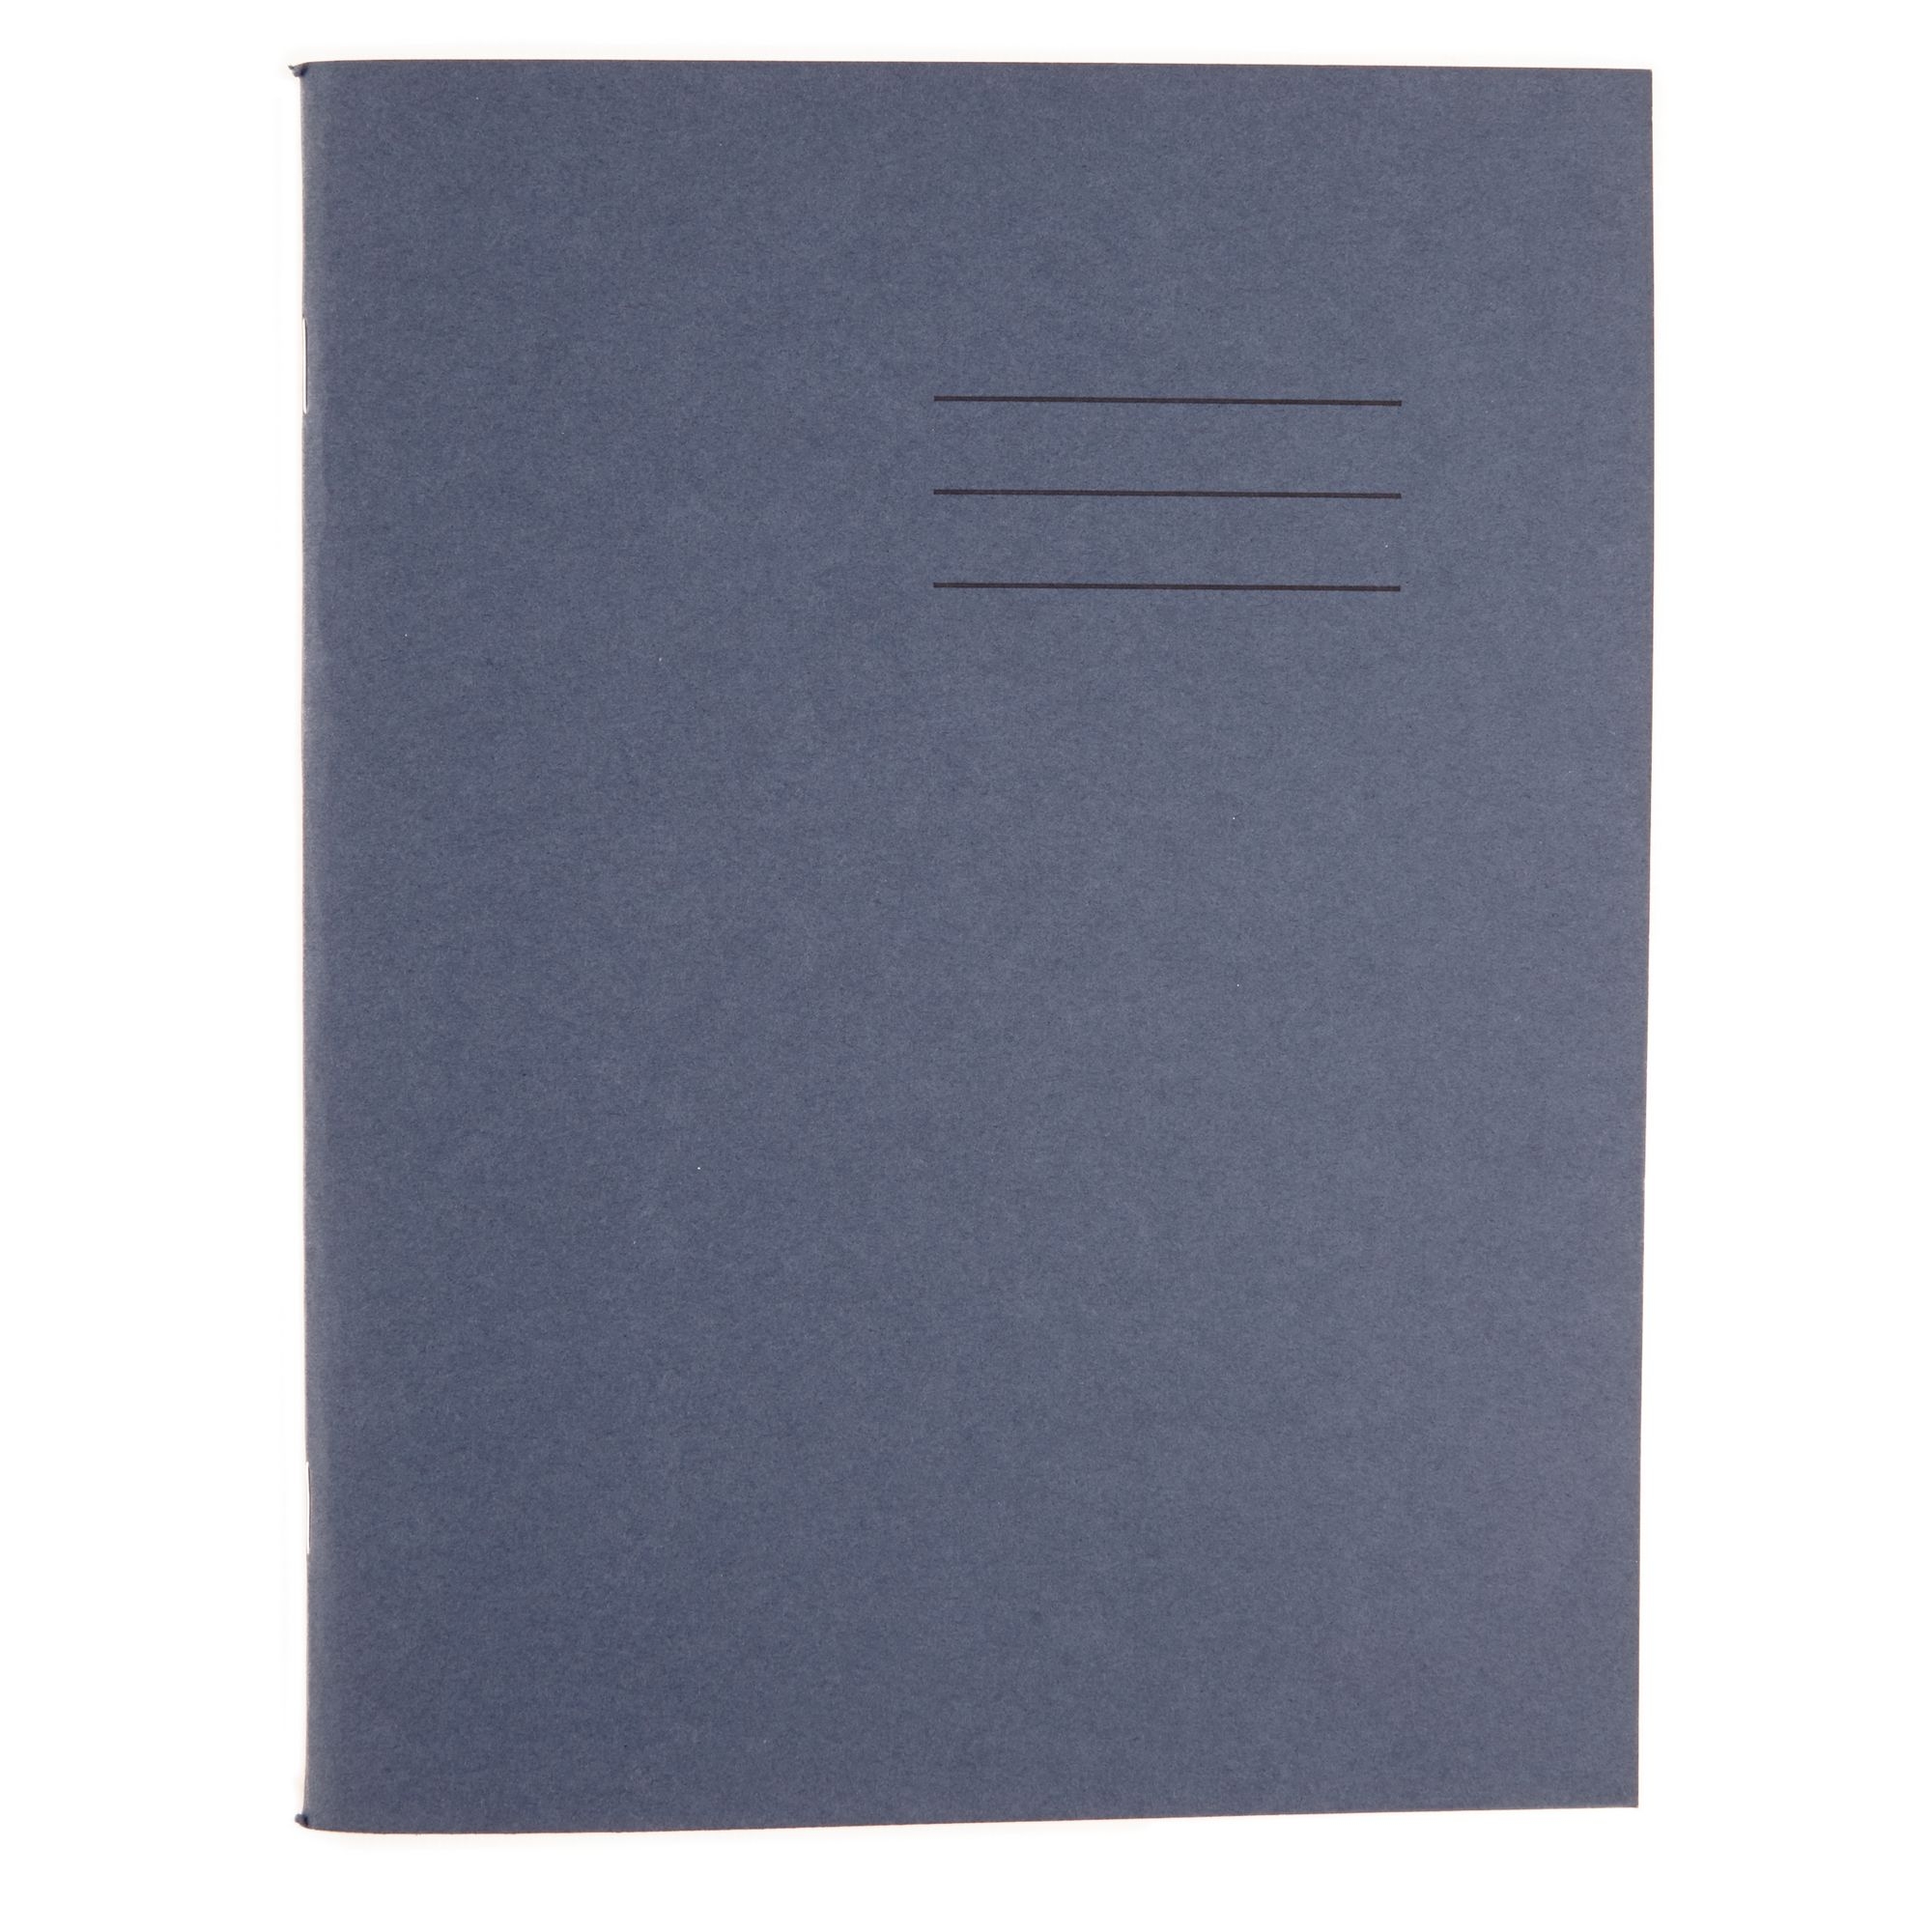 Classmates Blue A4 32 page 15mm Ruling Exercise Book - Pack of 100